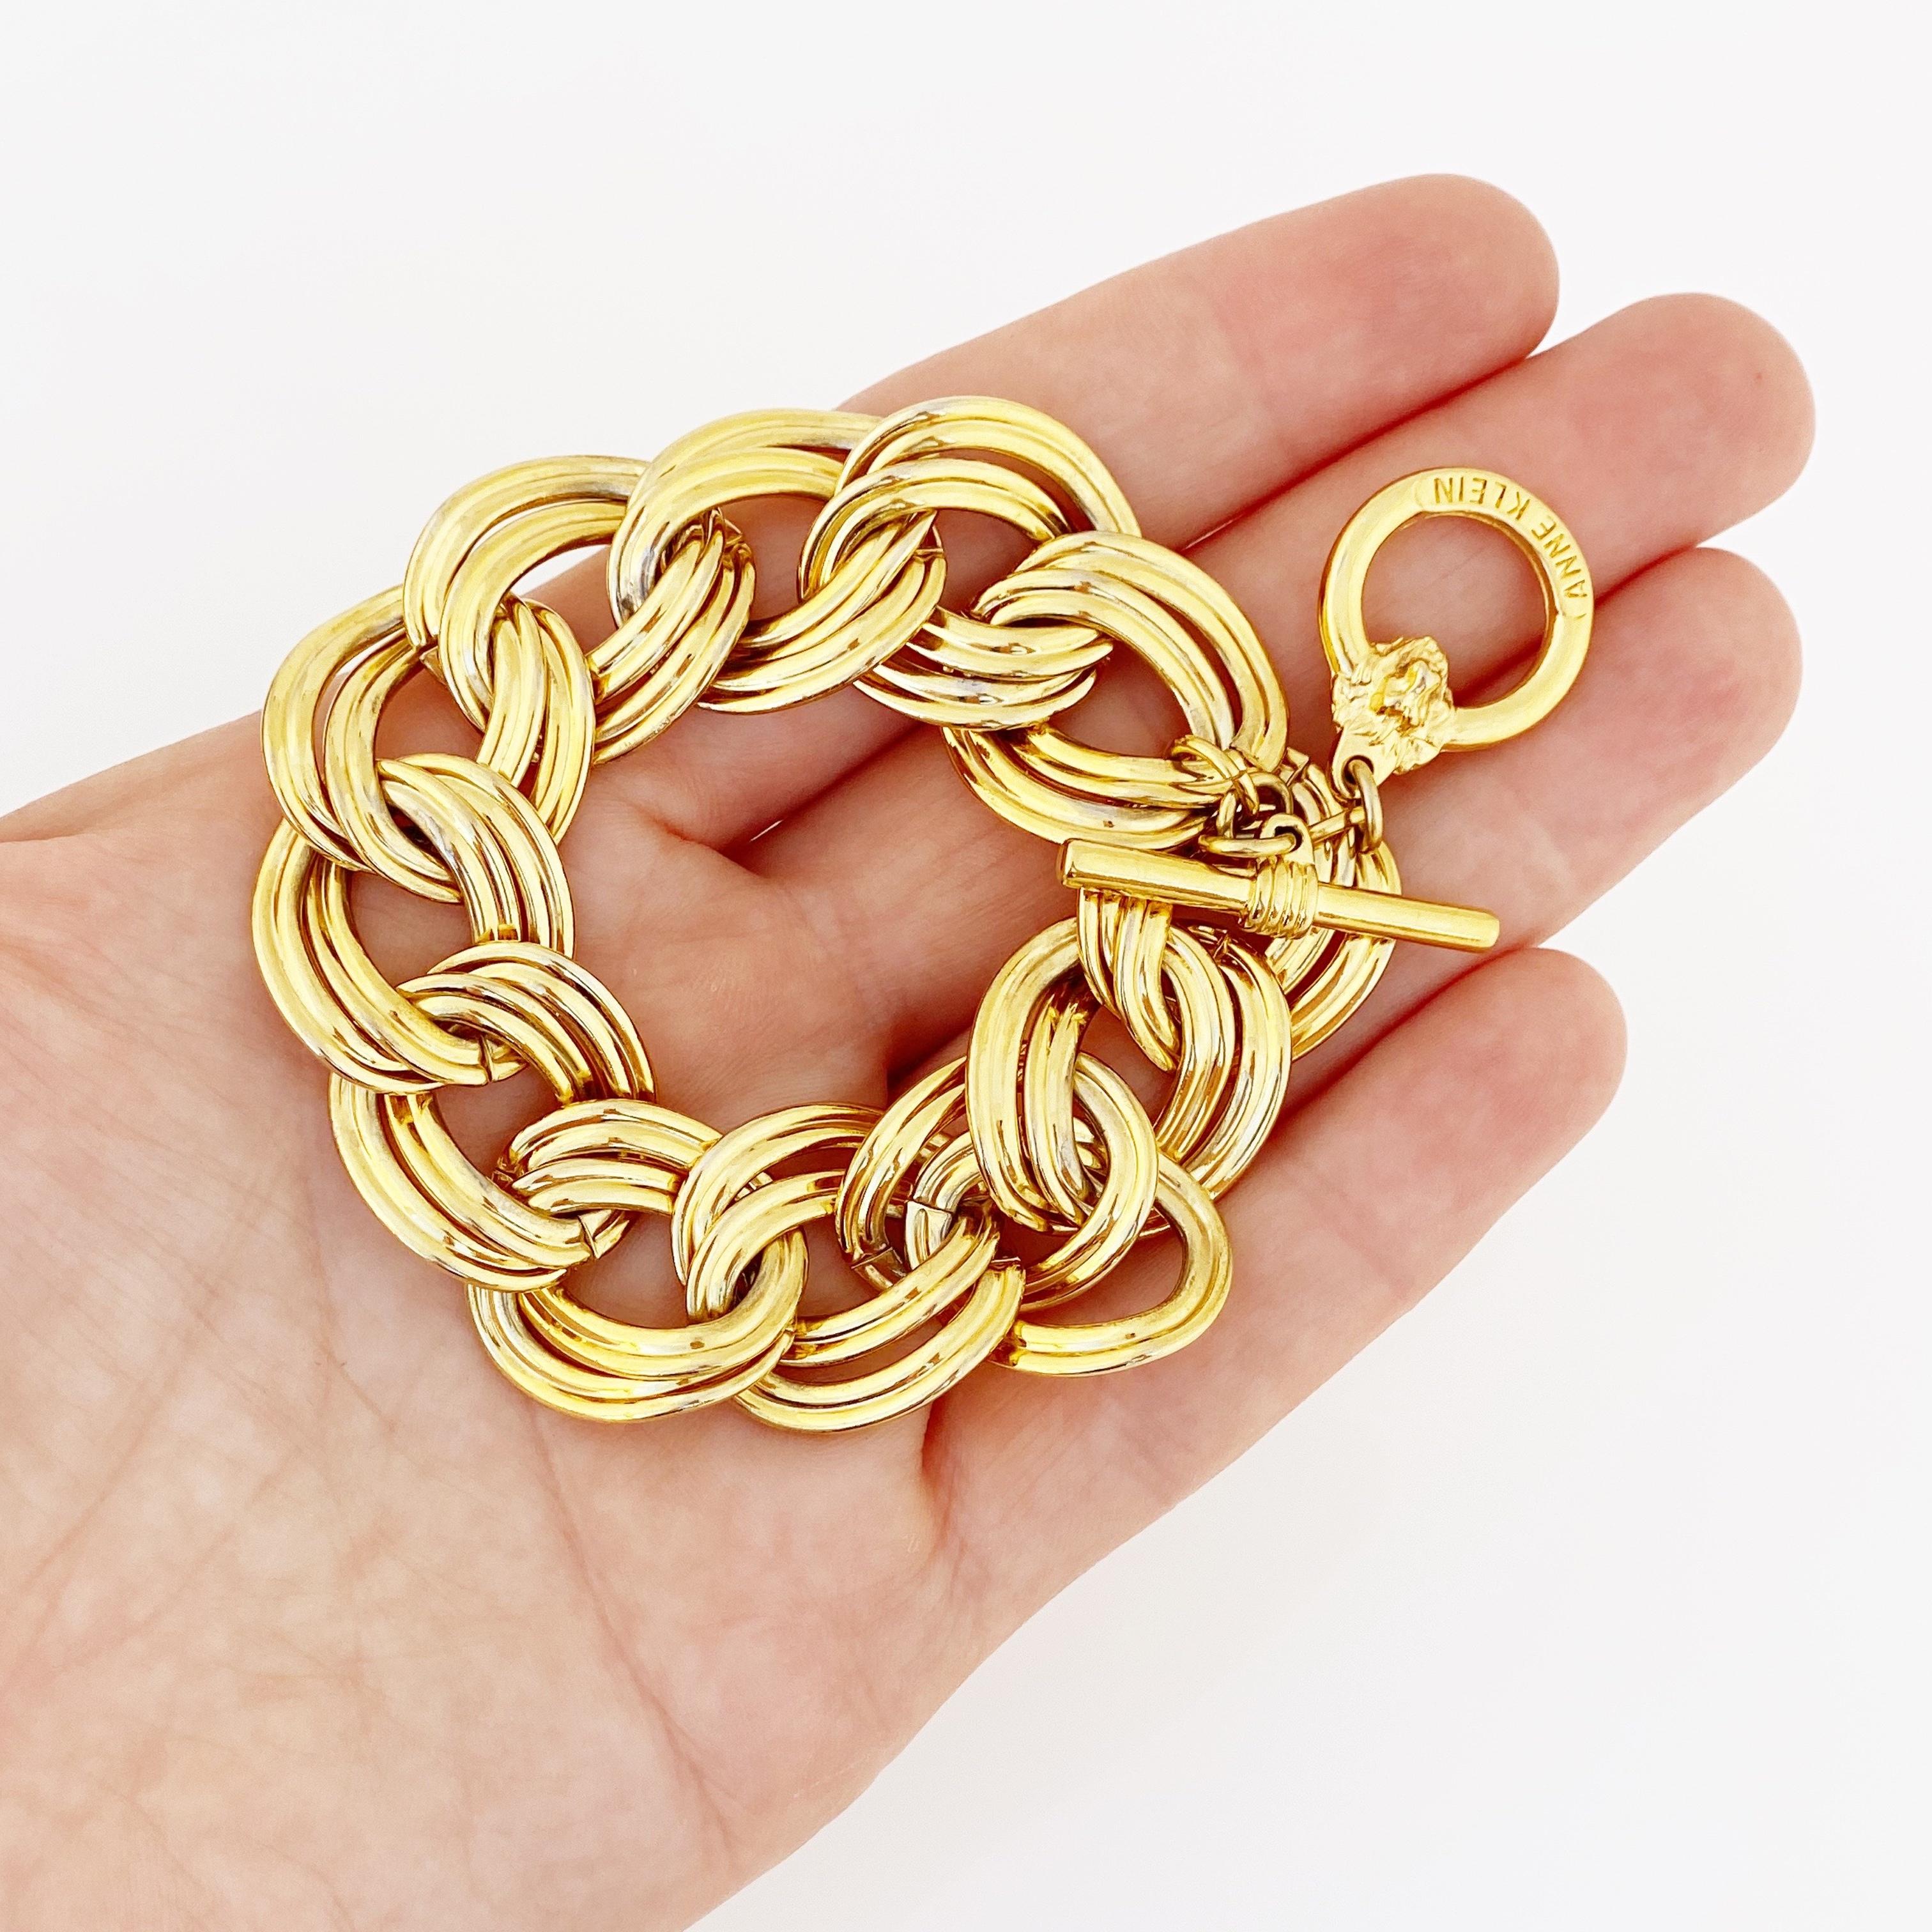 Gold Oval Link Chain Bracelet With Lion Clasp By Anne Klein, 1980s 3